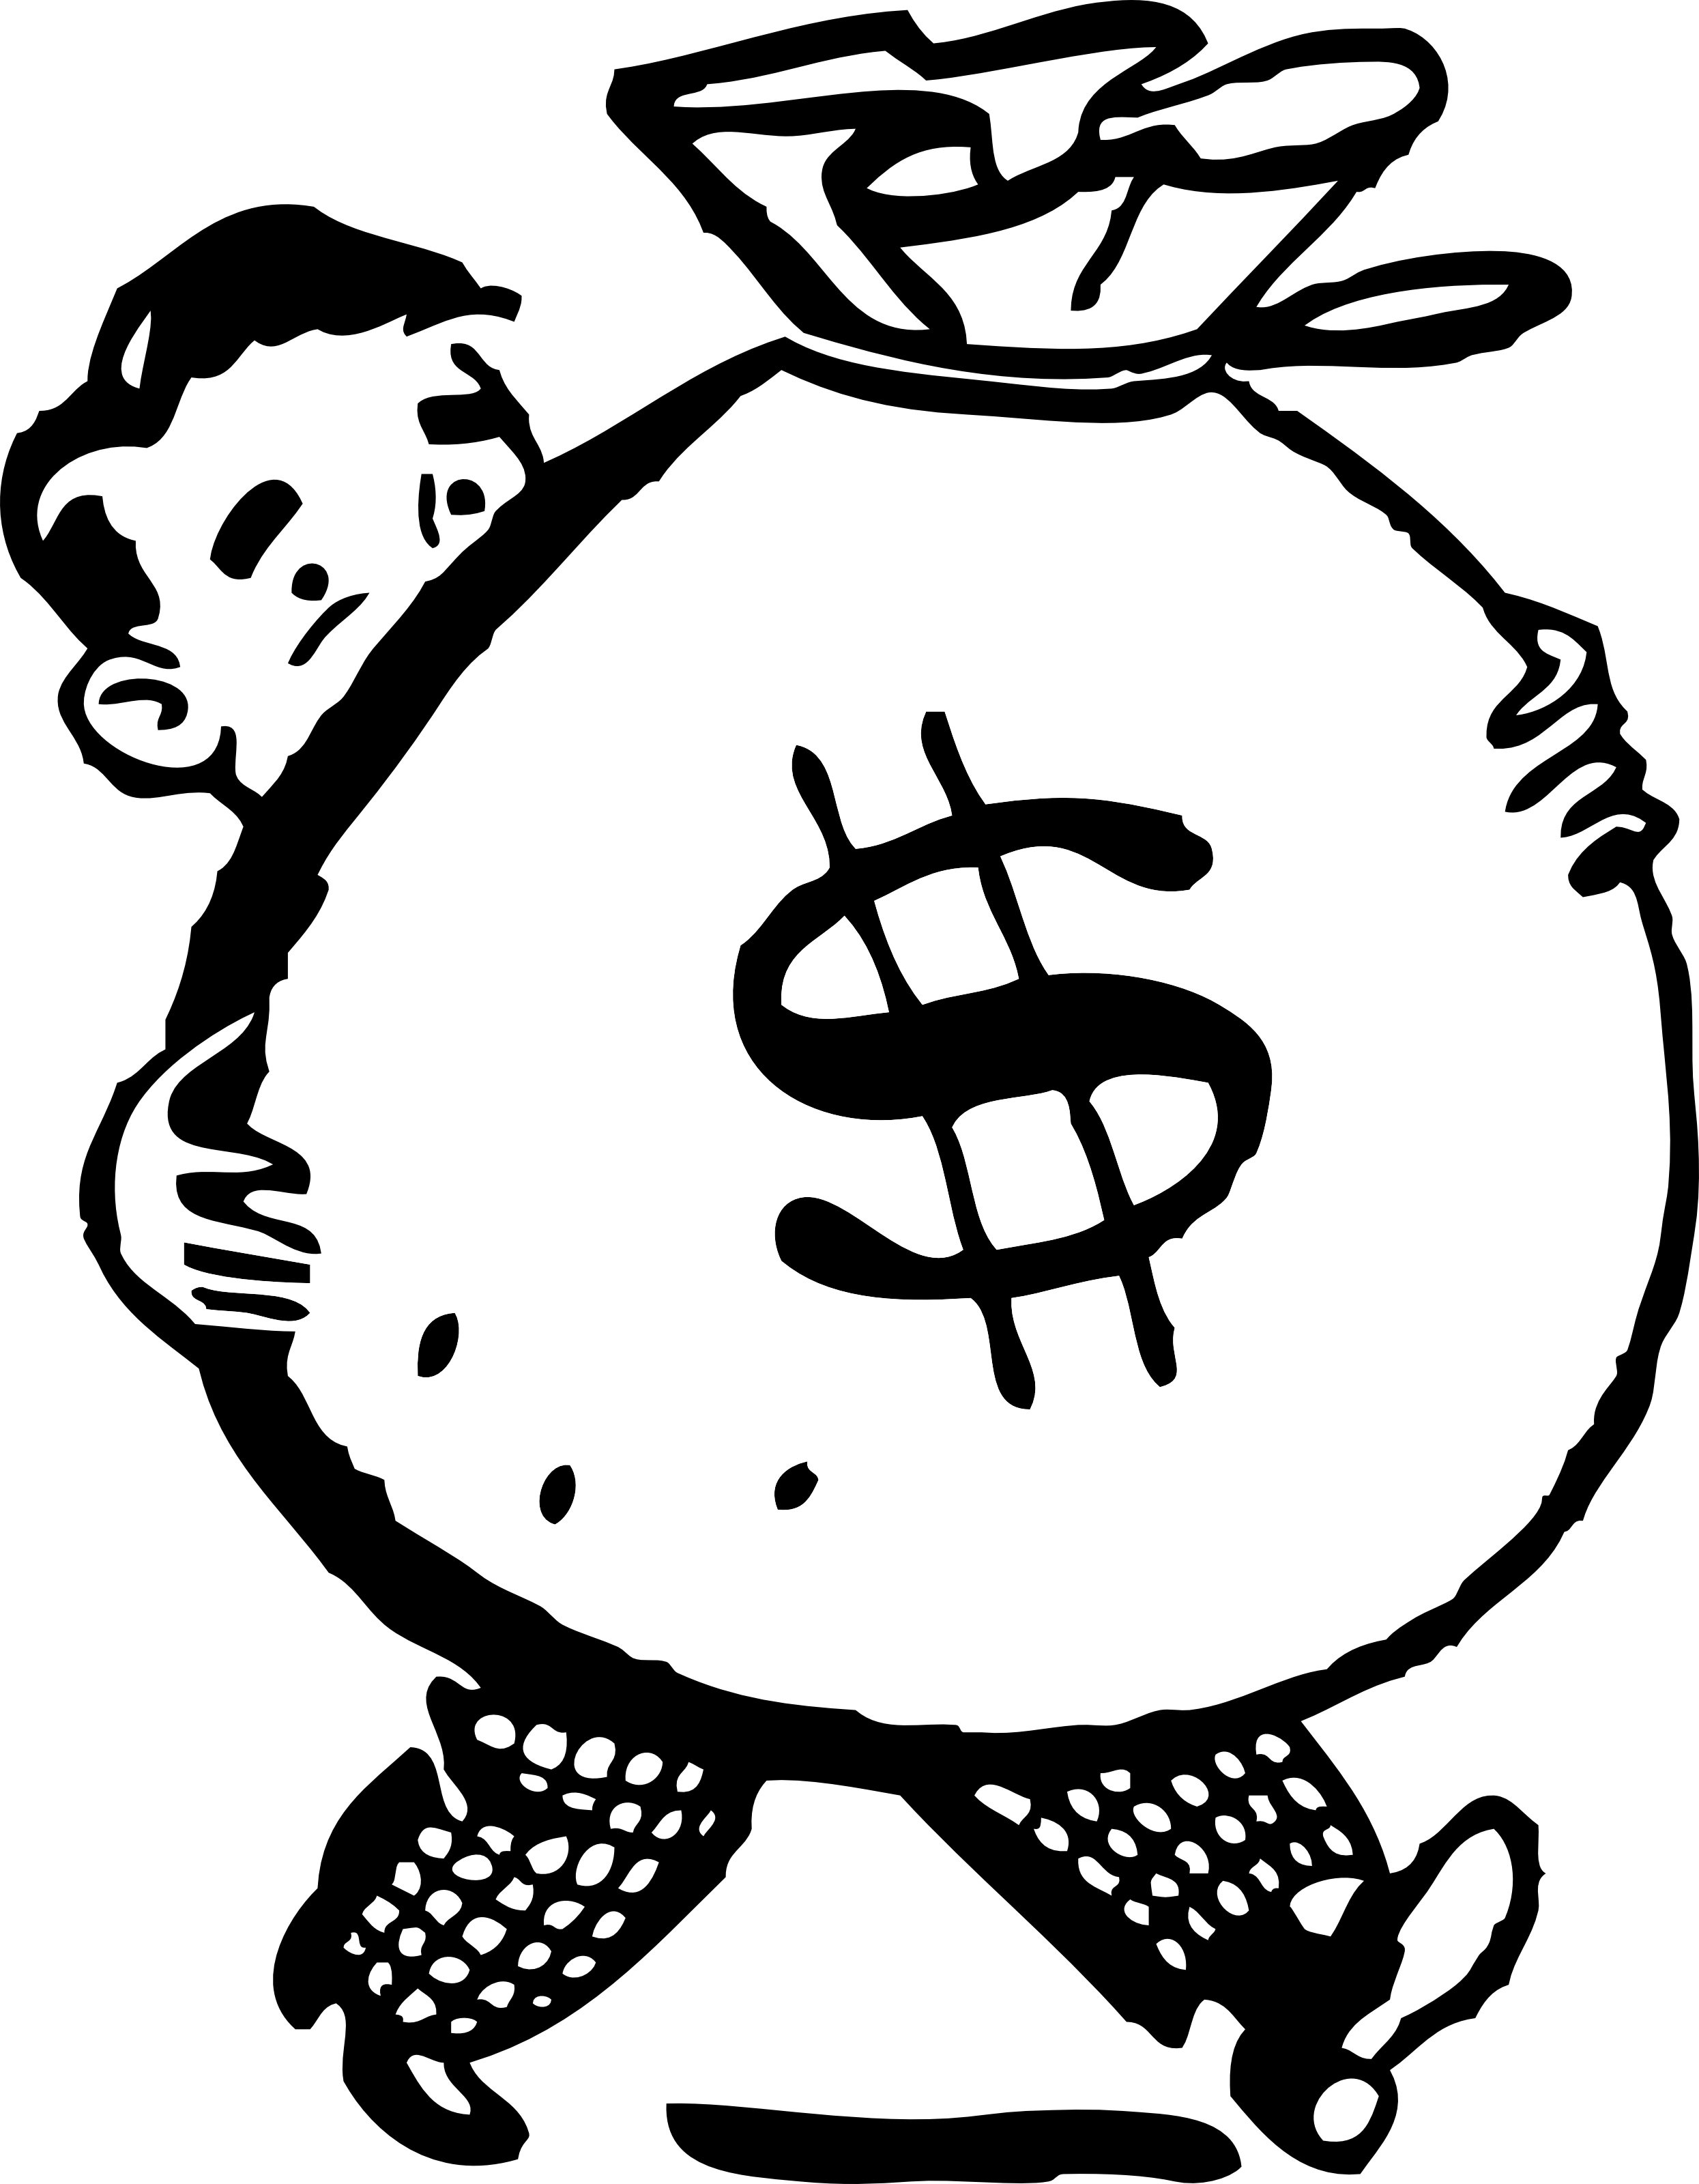 budget clipart black and white